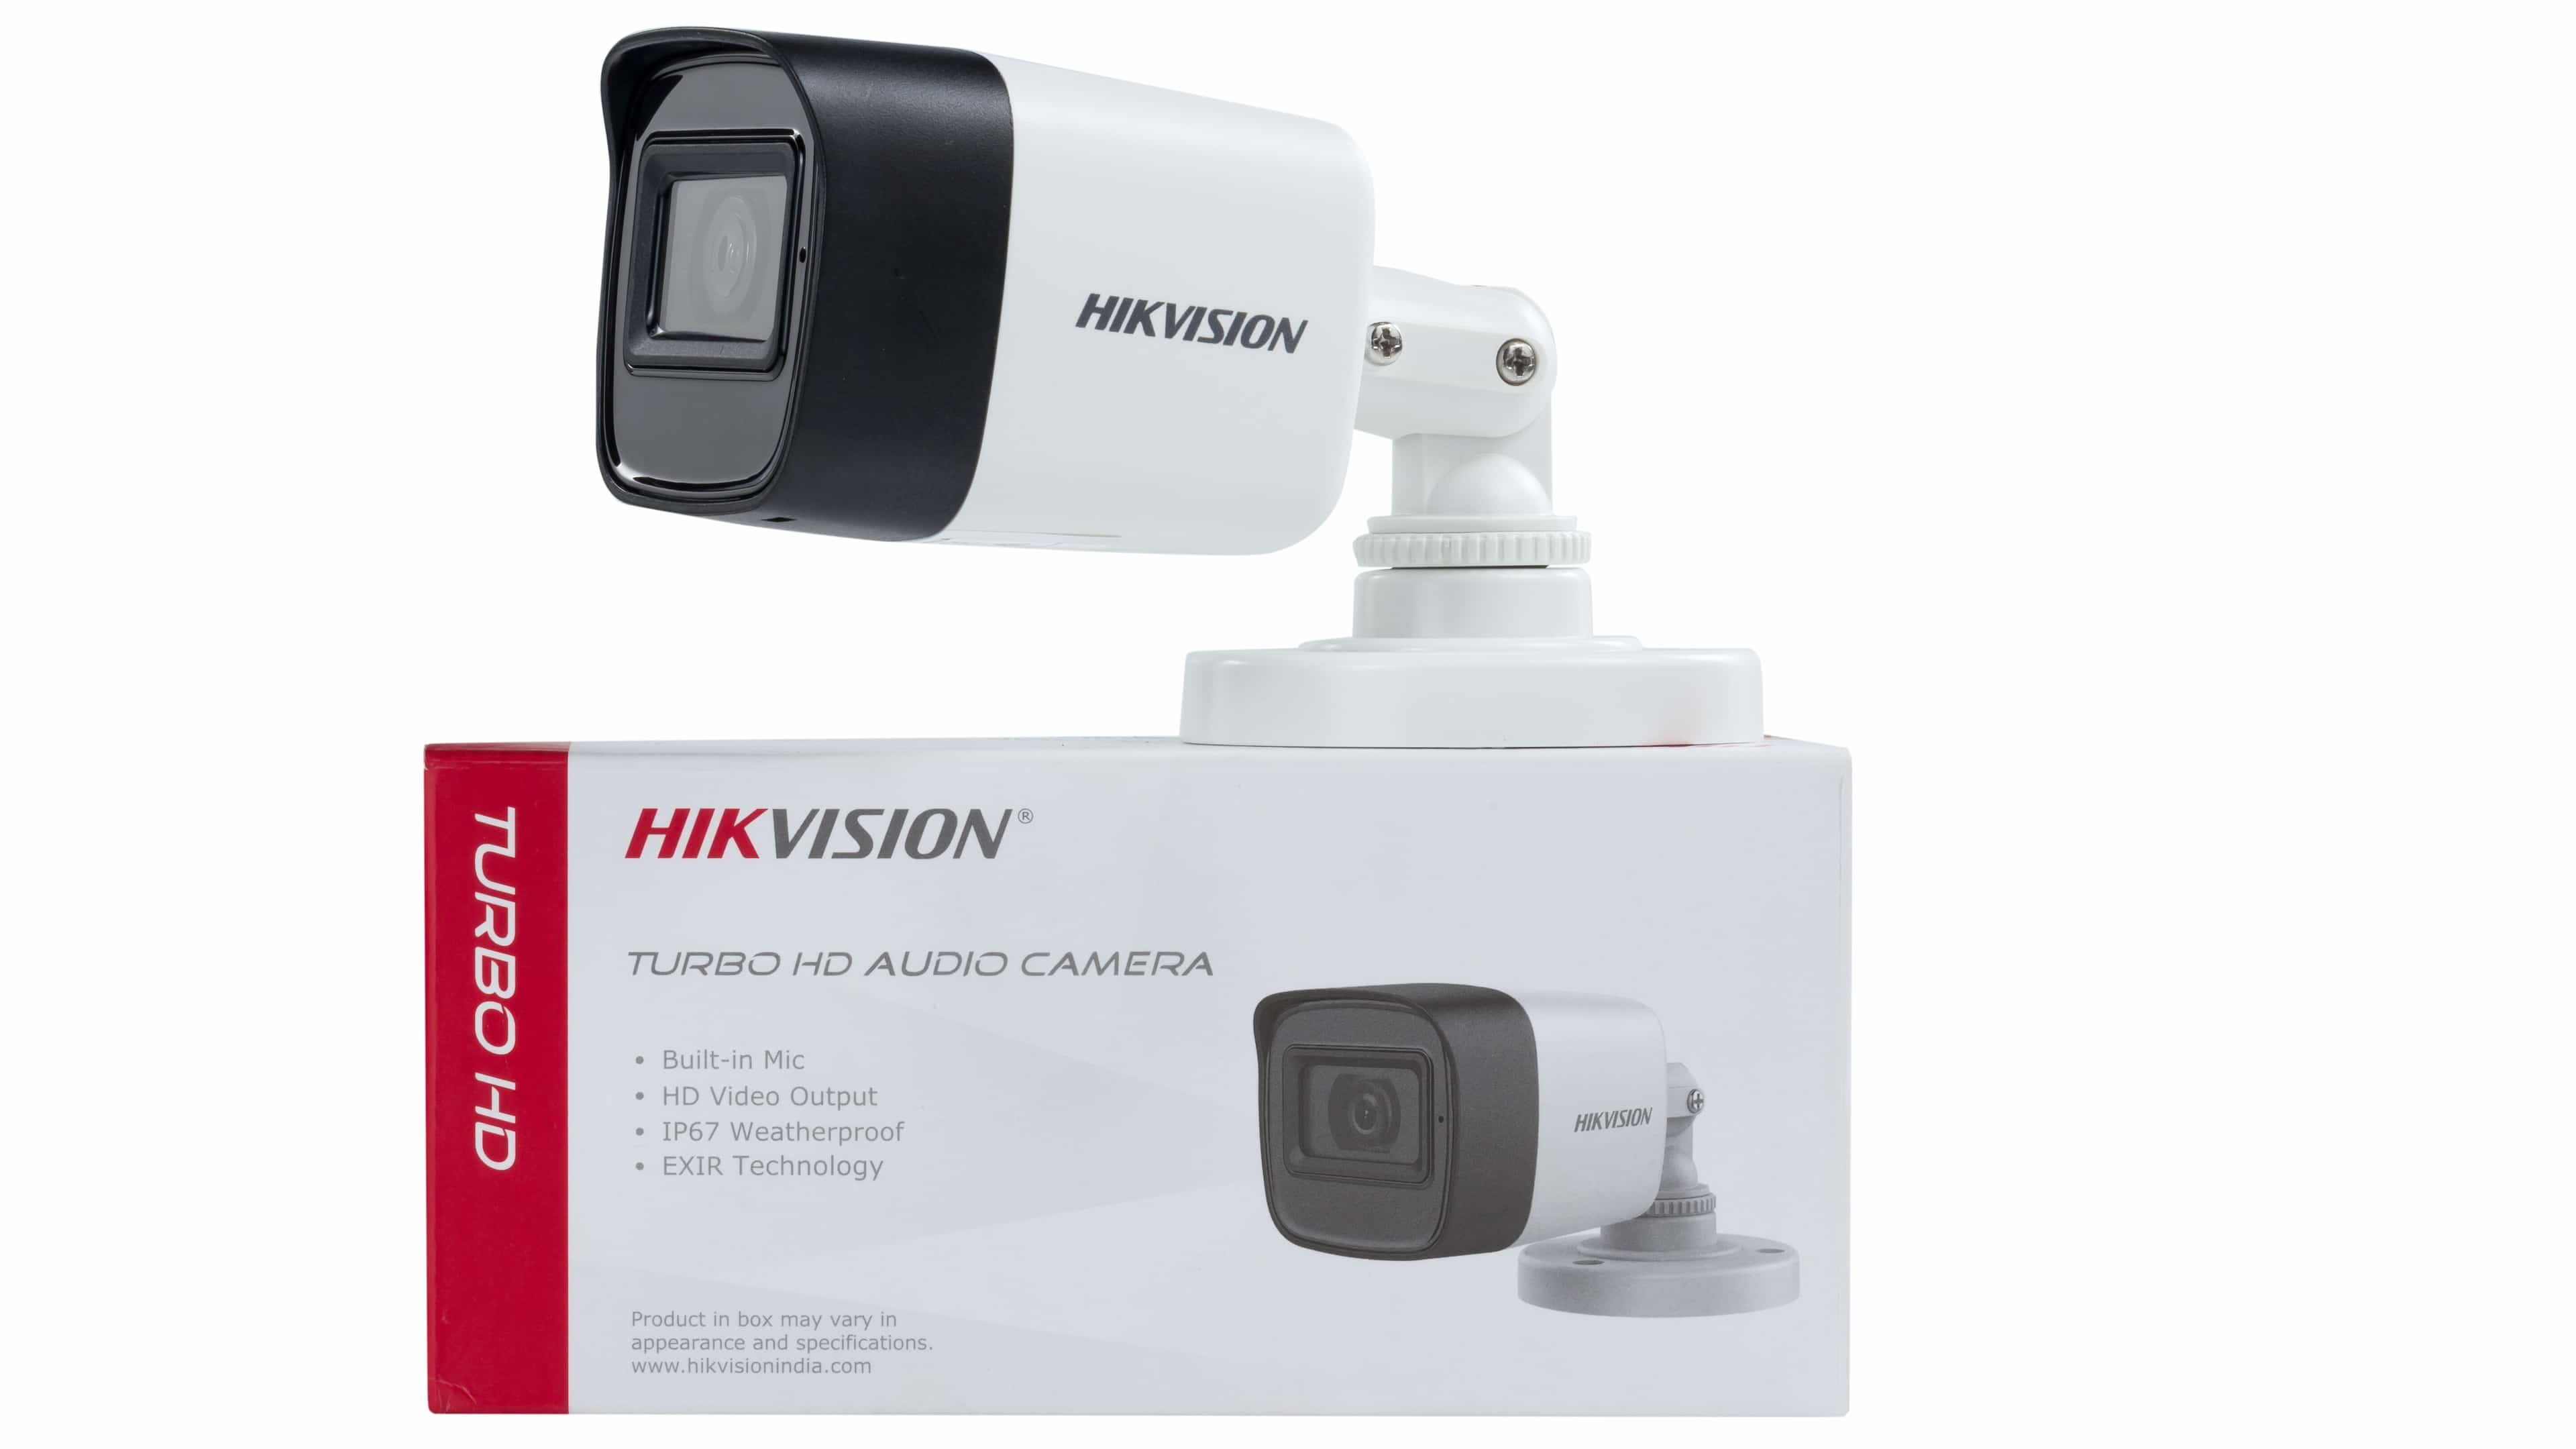 Hikvision-5MP-Audio-Fixed-Mini-Bullet-Camera-DS-2CE16H0T-ITPFS-image_3